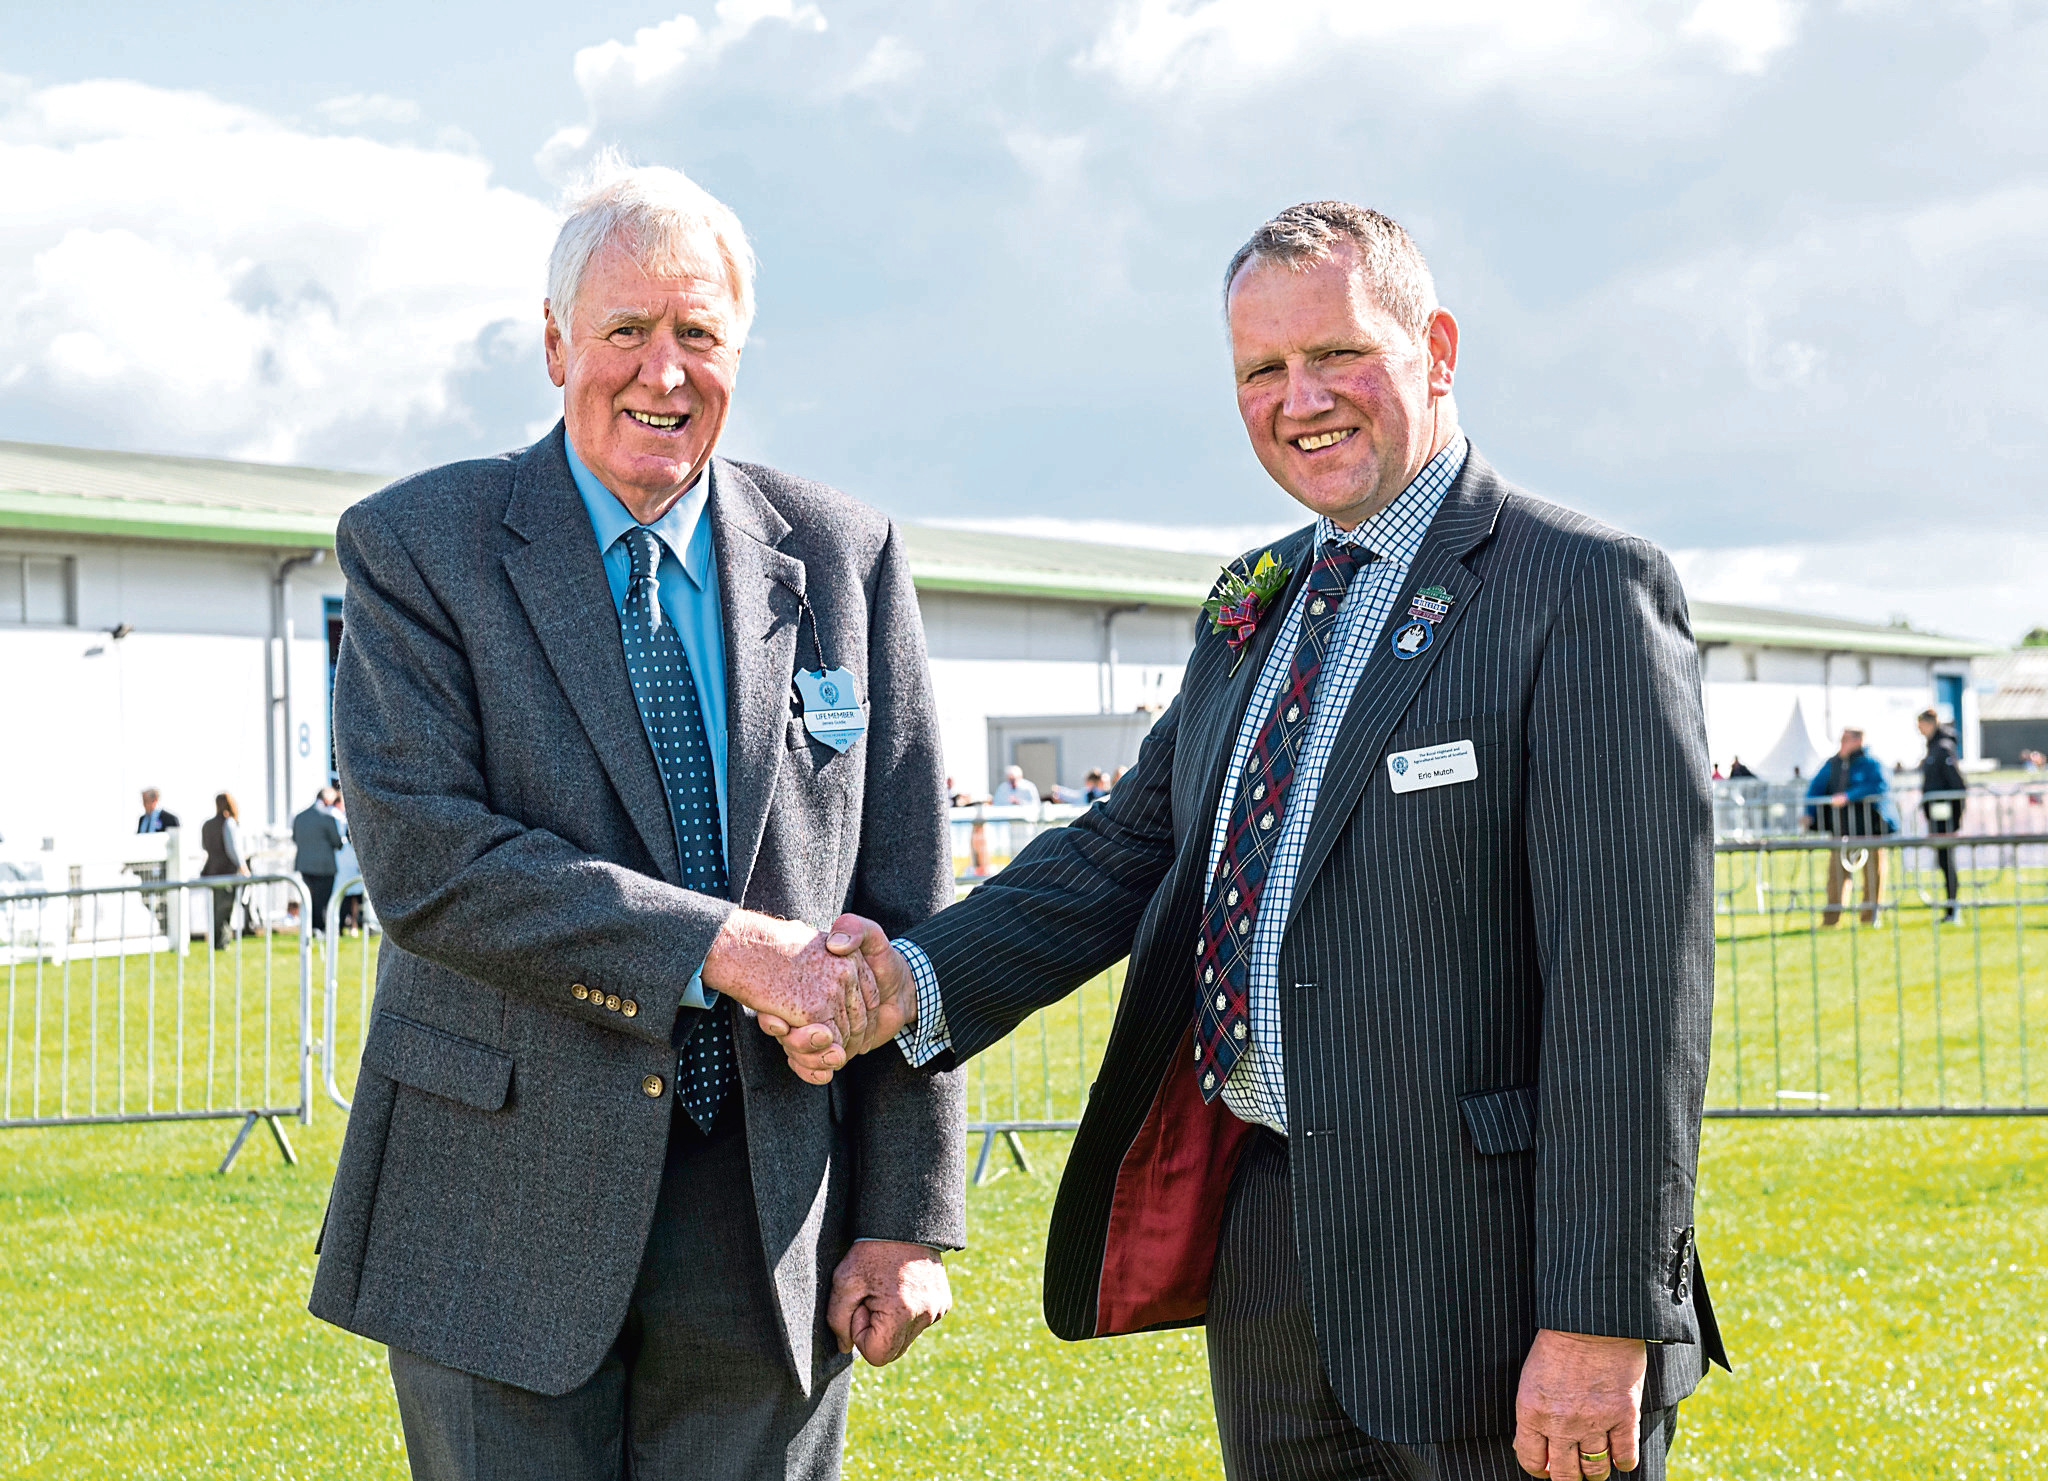 The Royal Highland Show
Sir William Young award winner Jim Goldie with RHASS director Eric Mutch at the Royal Highland Show.